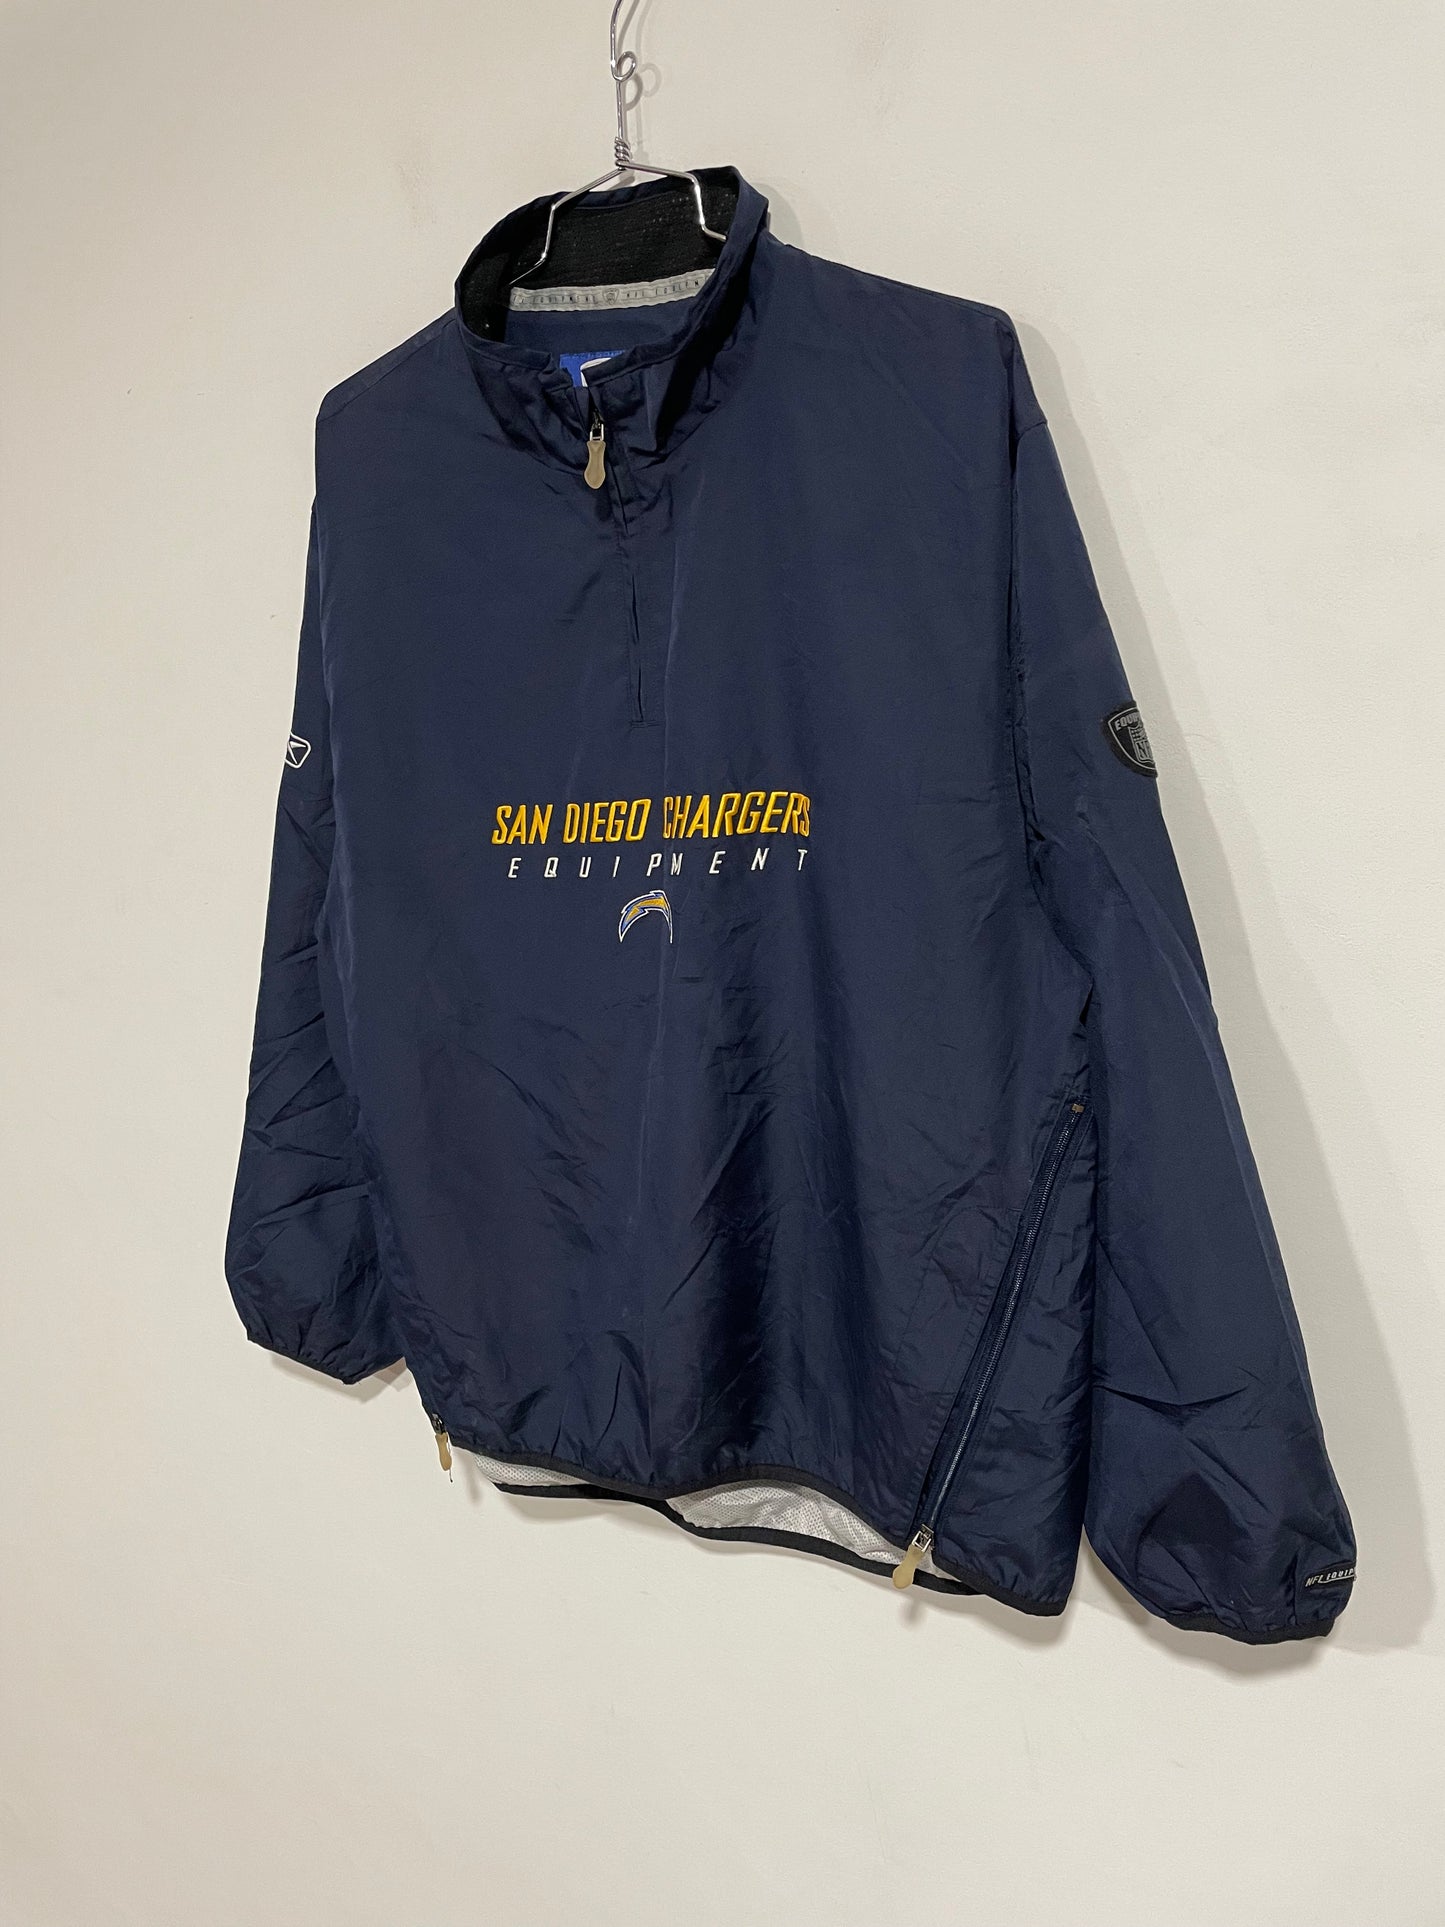 Track top giubbotto NFL San Diego Chargers (D033)